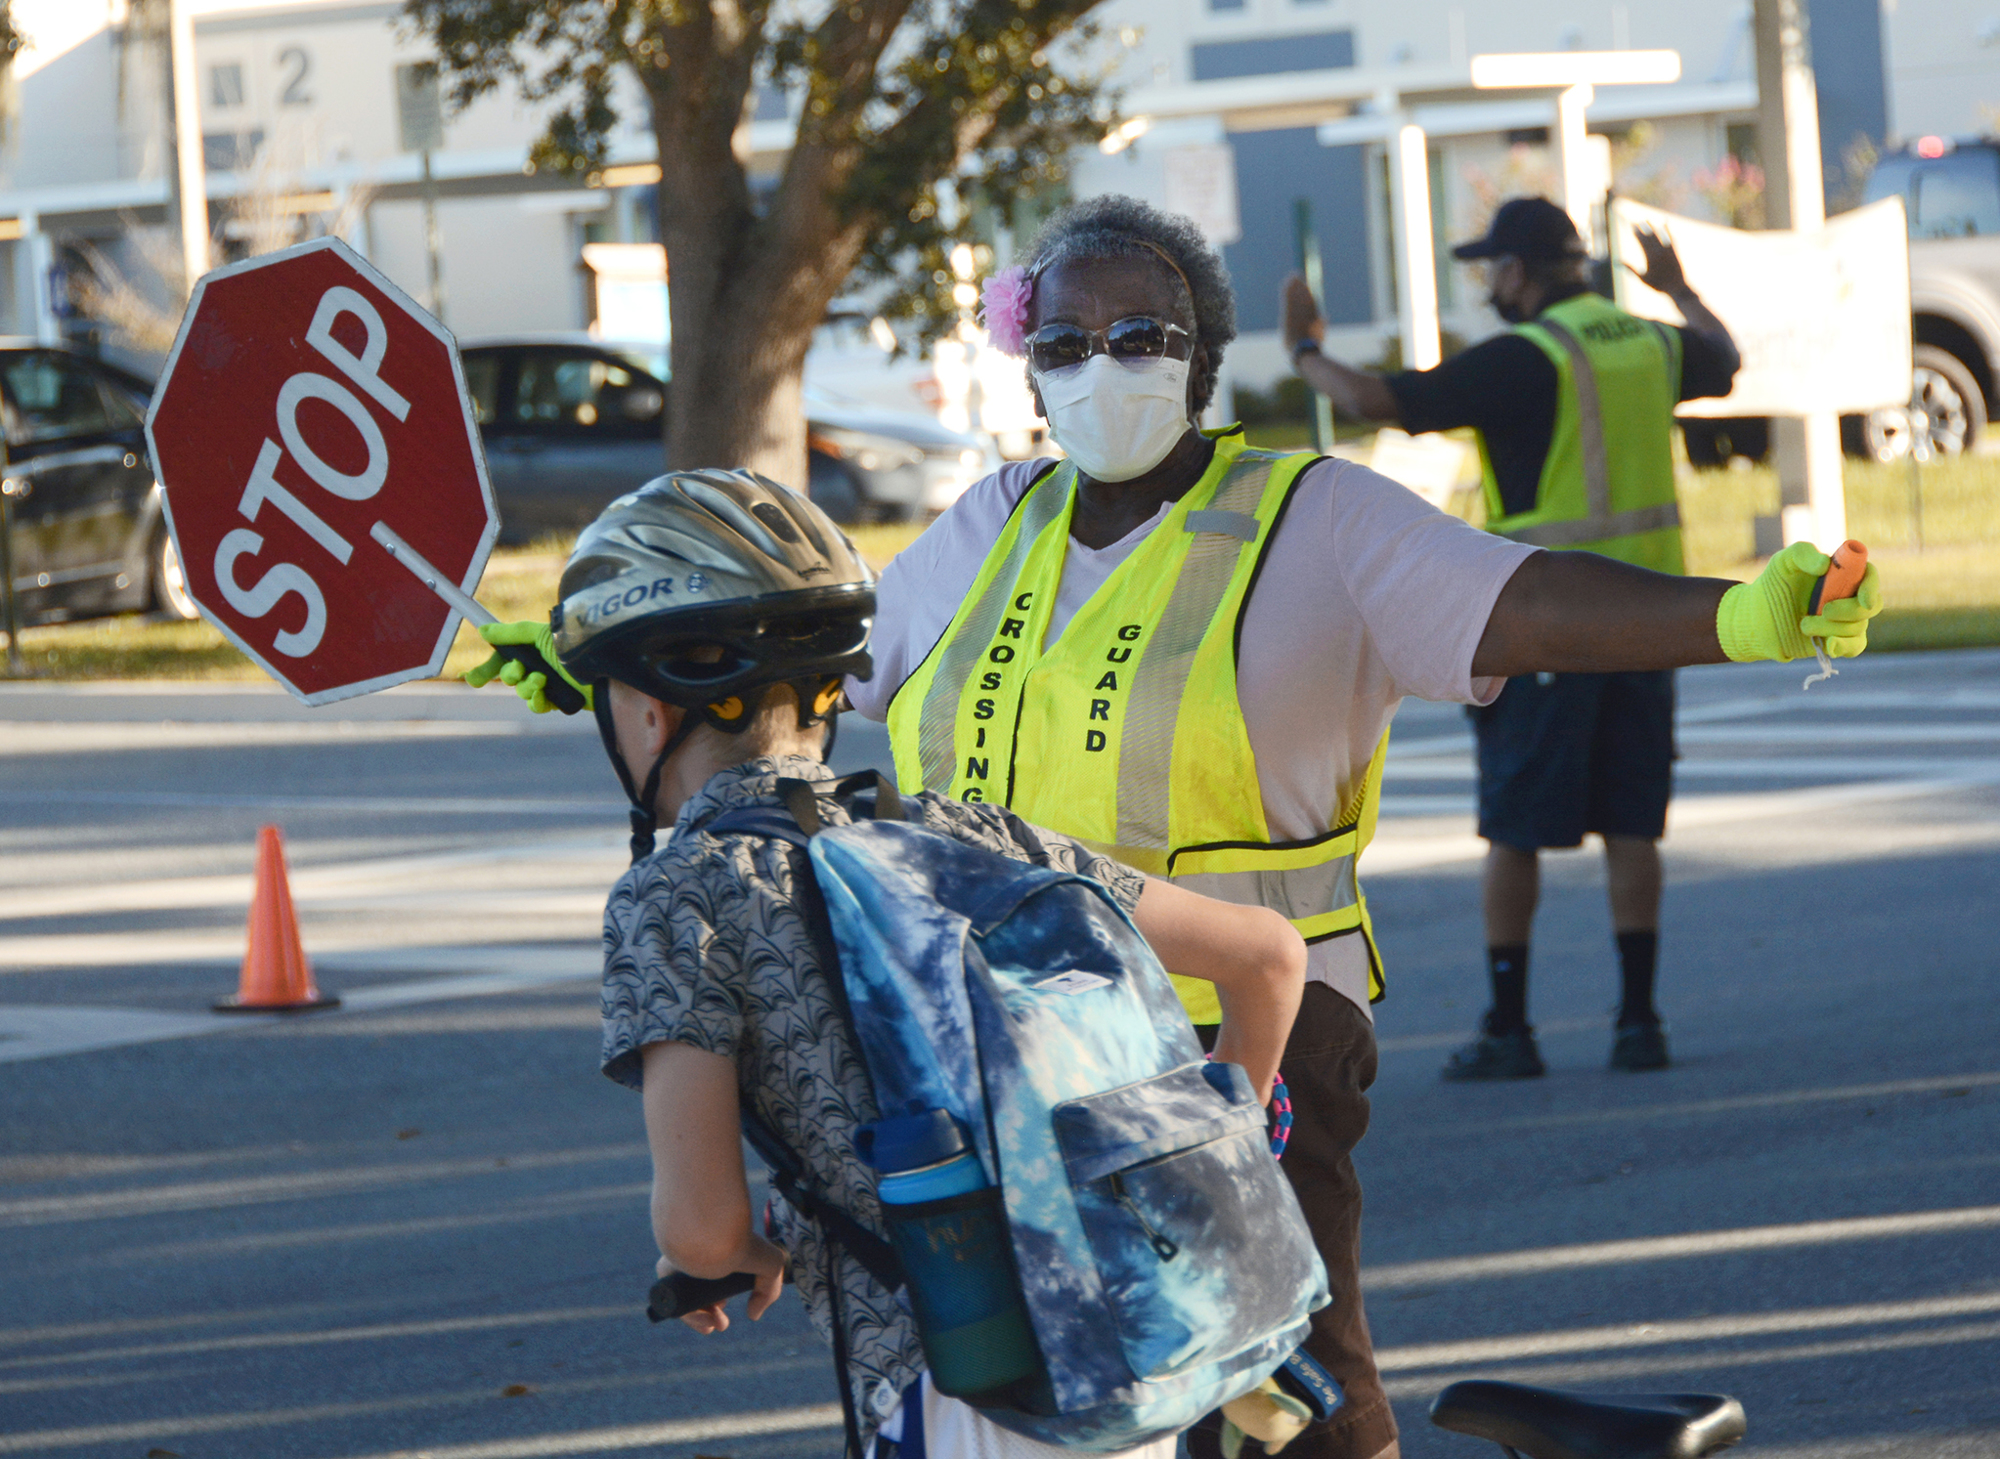 Ruth Marcus helps pedestrians on their way to Windermere Elementary School.